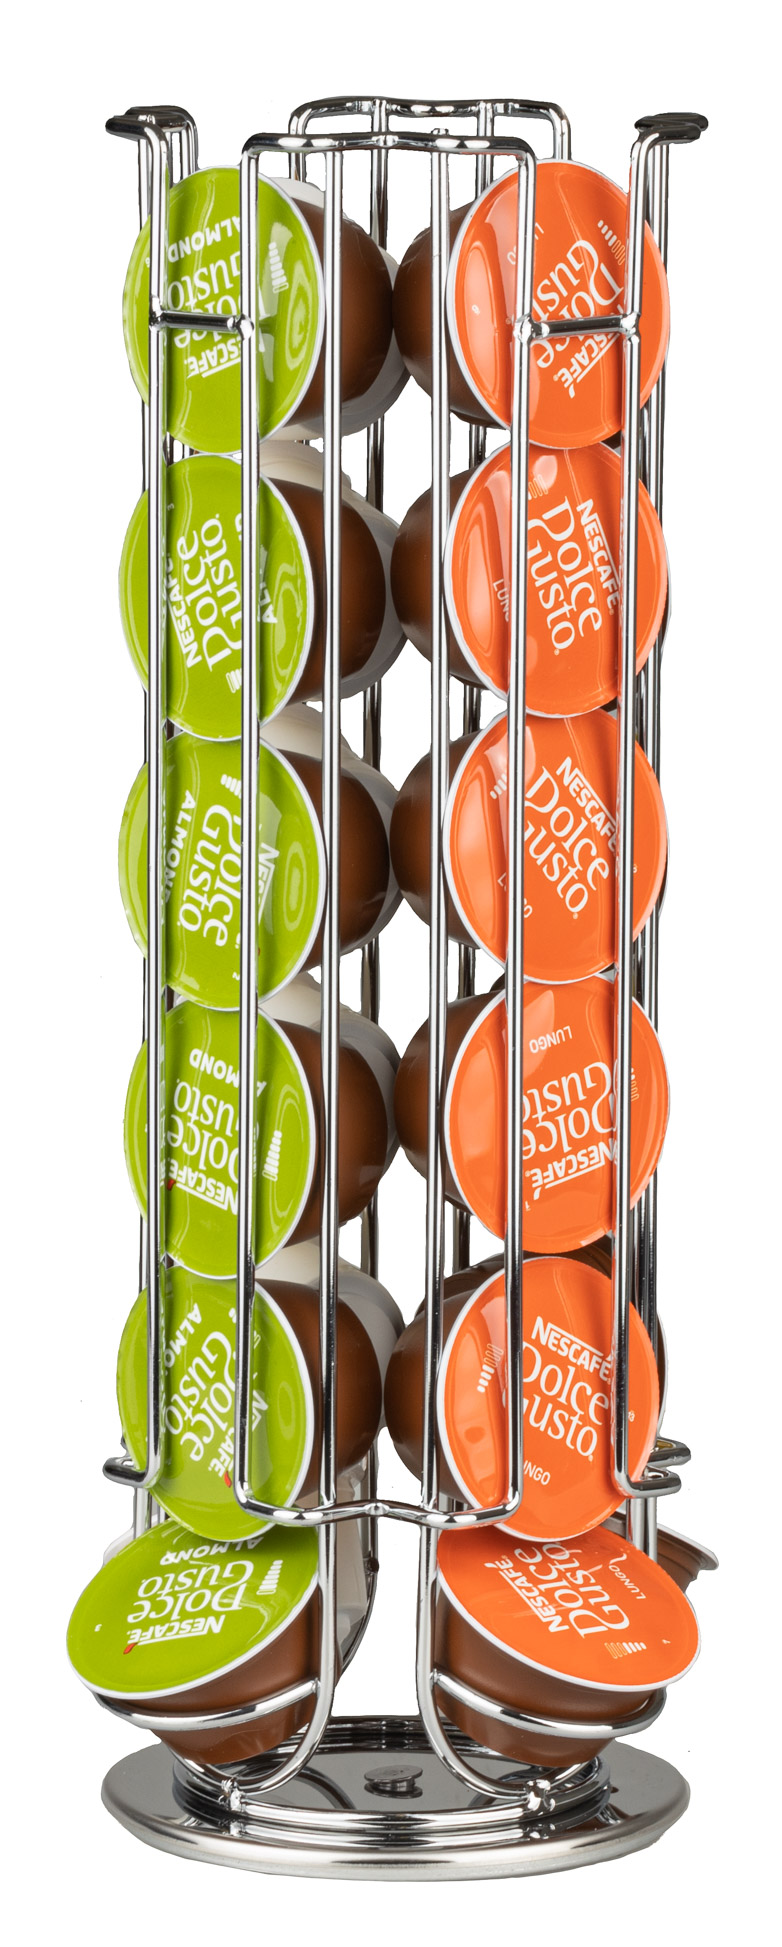 Porte-capsules KitchenBrothers pour capsules Dolce Gusto - Porte